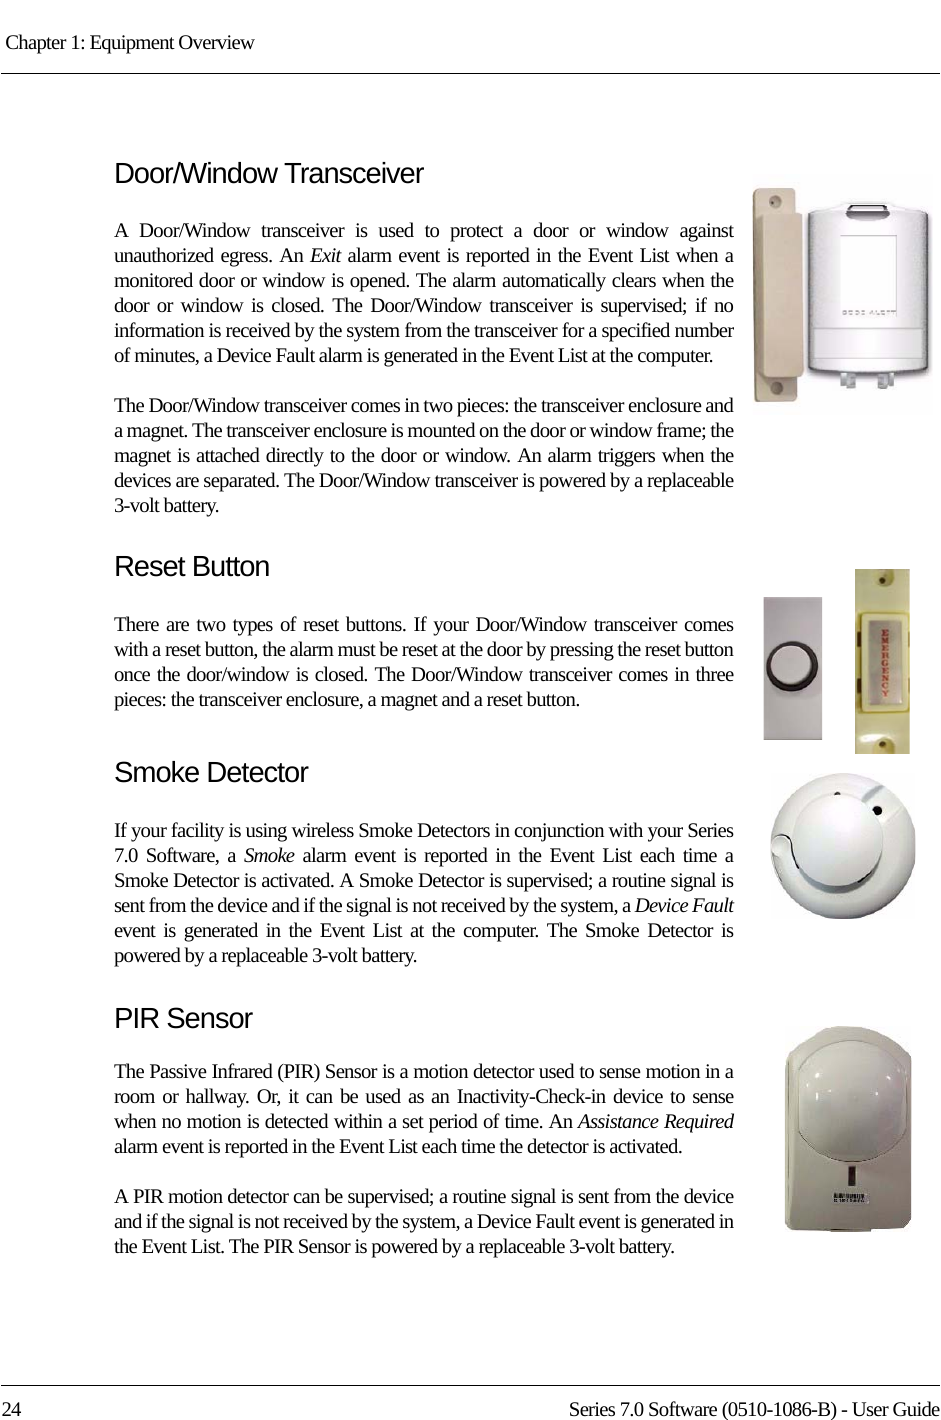 Chapter 1: Equipment Overview 24 Series 7.0 Software (0510-1086-B) - User GuideDoor/Window TransceiverA Door/Window transceiver is used to protect a door or window against unauthorized egress. An Exit alarm event is reported in the Event List when a monitored door or window is opened. The alarm automatically clears when the door or window is closed. The Door/Window transceiver is supervised; if no information is received by the system from the transceiver for a specified number of minutes, a Device Fault alarm is generated in the Event List at the computer.The Door/Window transceiver comes in two pieces: the transceiver enclosure and a magnet. The transceiver enclosure is mounted on the door or window frame; the magnet is attached directly to the door or window. An alarm triggers when the devices are separated. The Door/Window transceiver is powered by a replaceable 3-volt battery.Reset ButtonThere are two types of reset buttons. If your Door/Window transceiver comes with a reset button, the alarm must be reset at the door by pressing the reset button once the door/window is closed. The Door/Window transceiver comes in three pieces: the transceiver enclosure, a magnet and a reset button. Smoke DetectorIf your facility is using wireless Smoke Detectors in conjunction with your Series 7.0 Software, a Smoke alarm event is reported in the Event List each time a Smoke Detector is activated. A Smoke Detector is supervised; a routine signal is sent from the device and if the signal is not received by the system, a Device Faultevent is generated in the Event List at the computer. The Smoke Detector is powered by a replaceable 3-volt battery.PIR SensorThe Passive Infrared (PIR) Sensor is a motion detector used to sense motion in a room or hallway. Or, it can be used as an Inactivity-Check-in device to sense when no motion is detected within a set period of time. An Assistance Requiredalarm event is reported in the Event List each time the detector is activated. A PIR motion detector can be supervised; a routine signal is sent from the device and if the signal is not received by the system, a Device Fault event is generated in the Event List. The PIR Sensor is powered by a replaceable 3-volt battery.